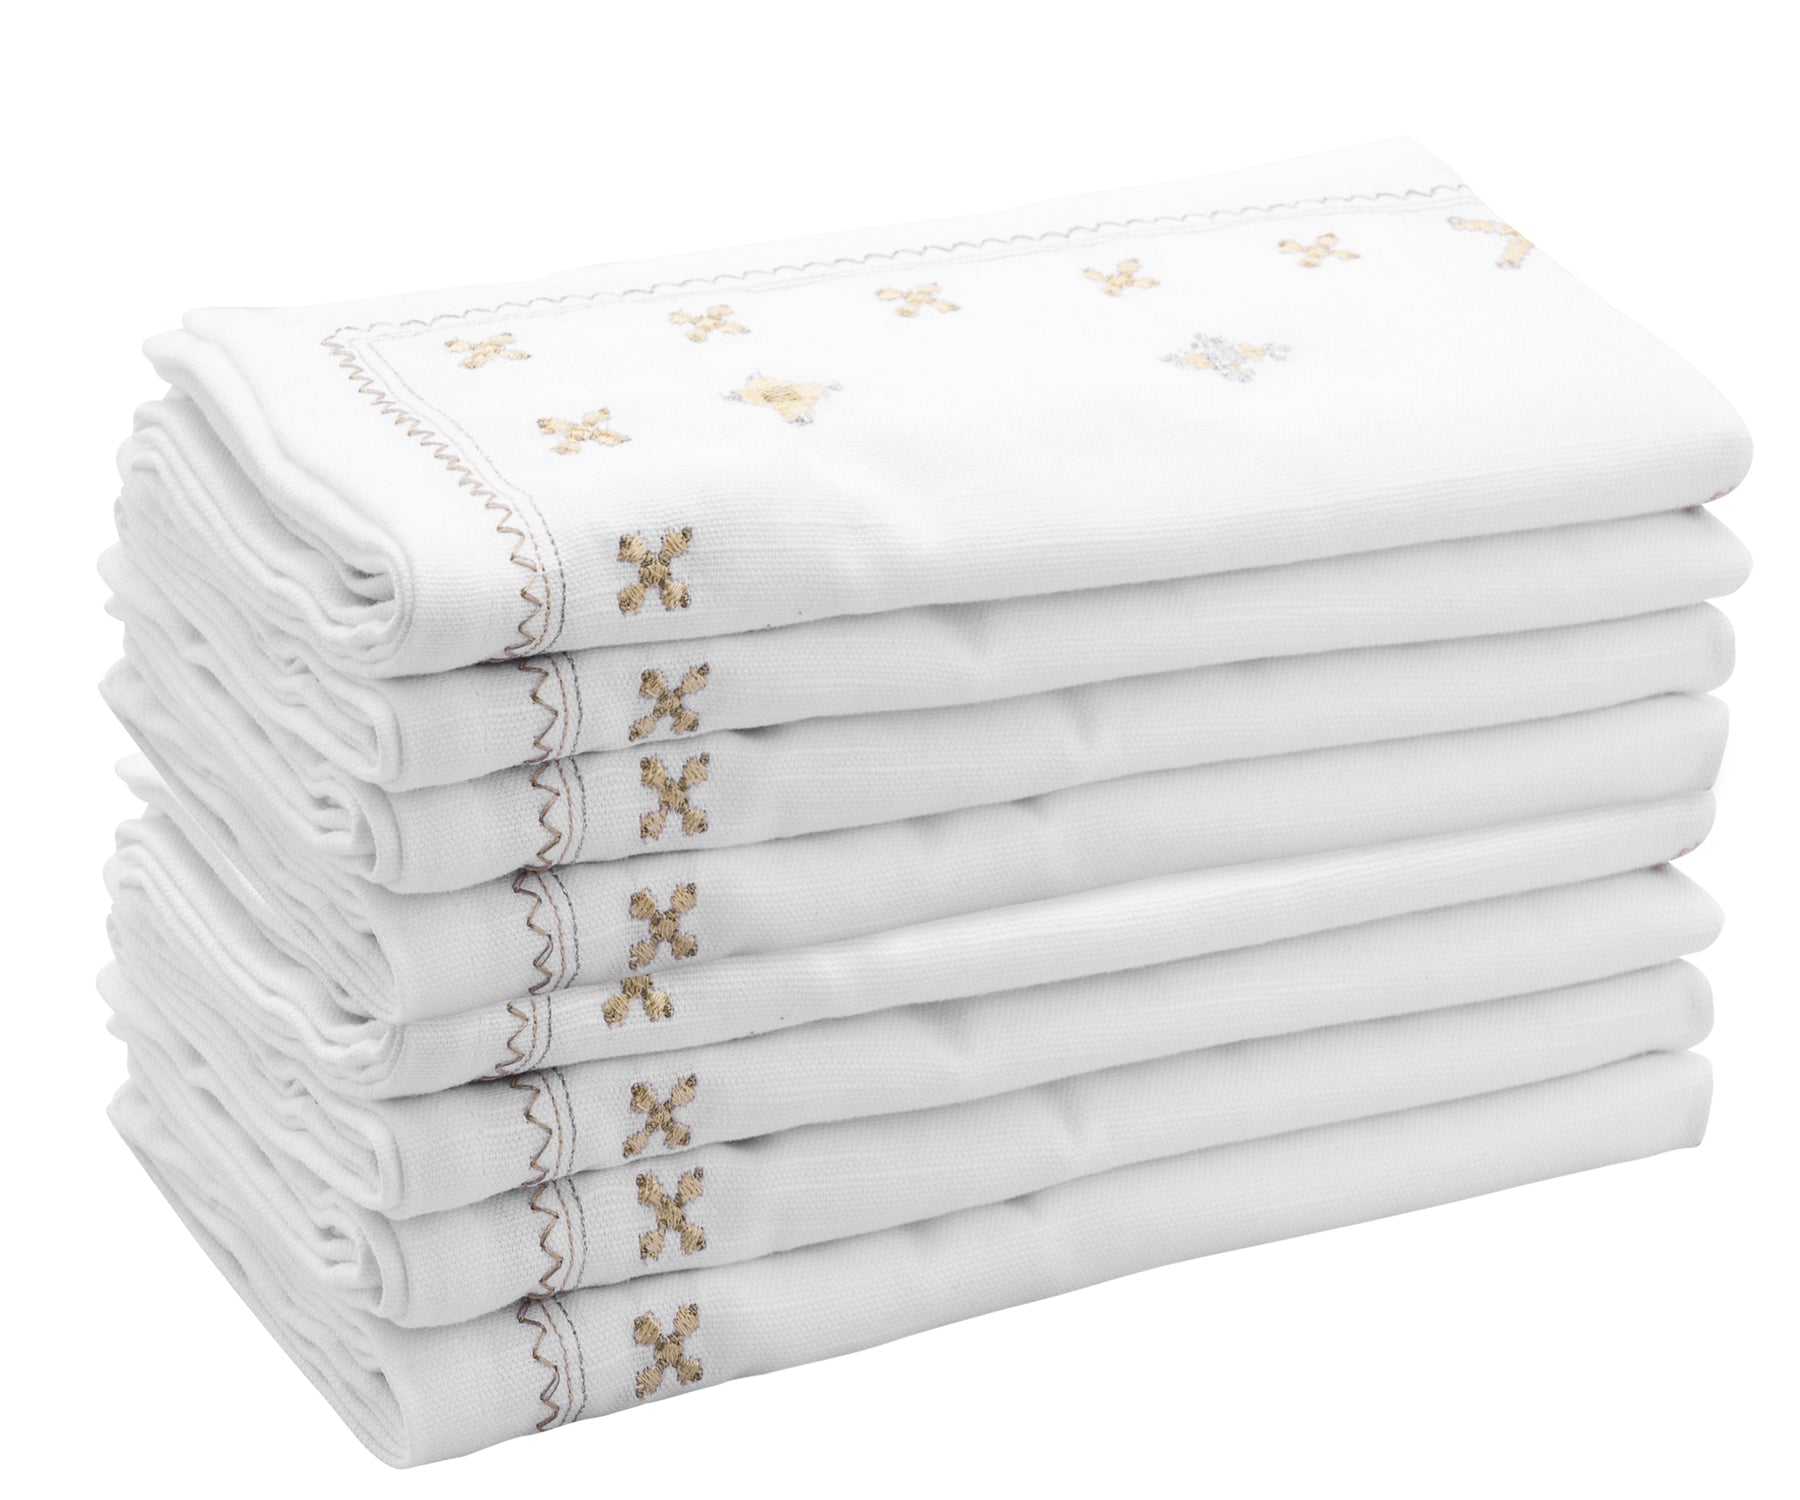 Gold Elegance: Stylish Cloth Napkins for Every Meal